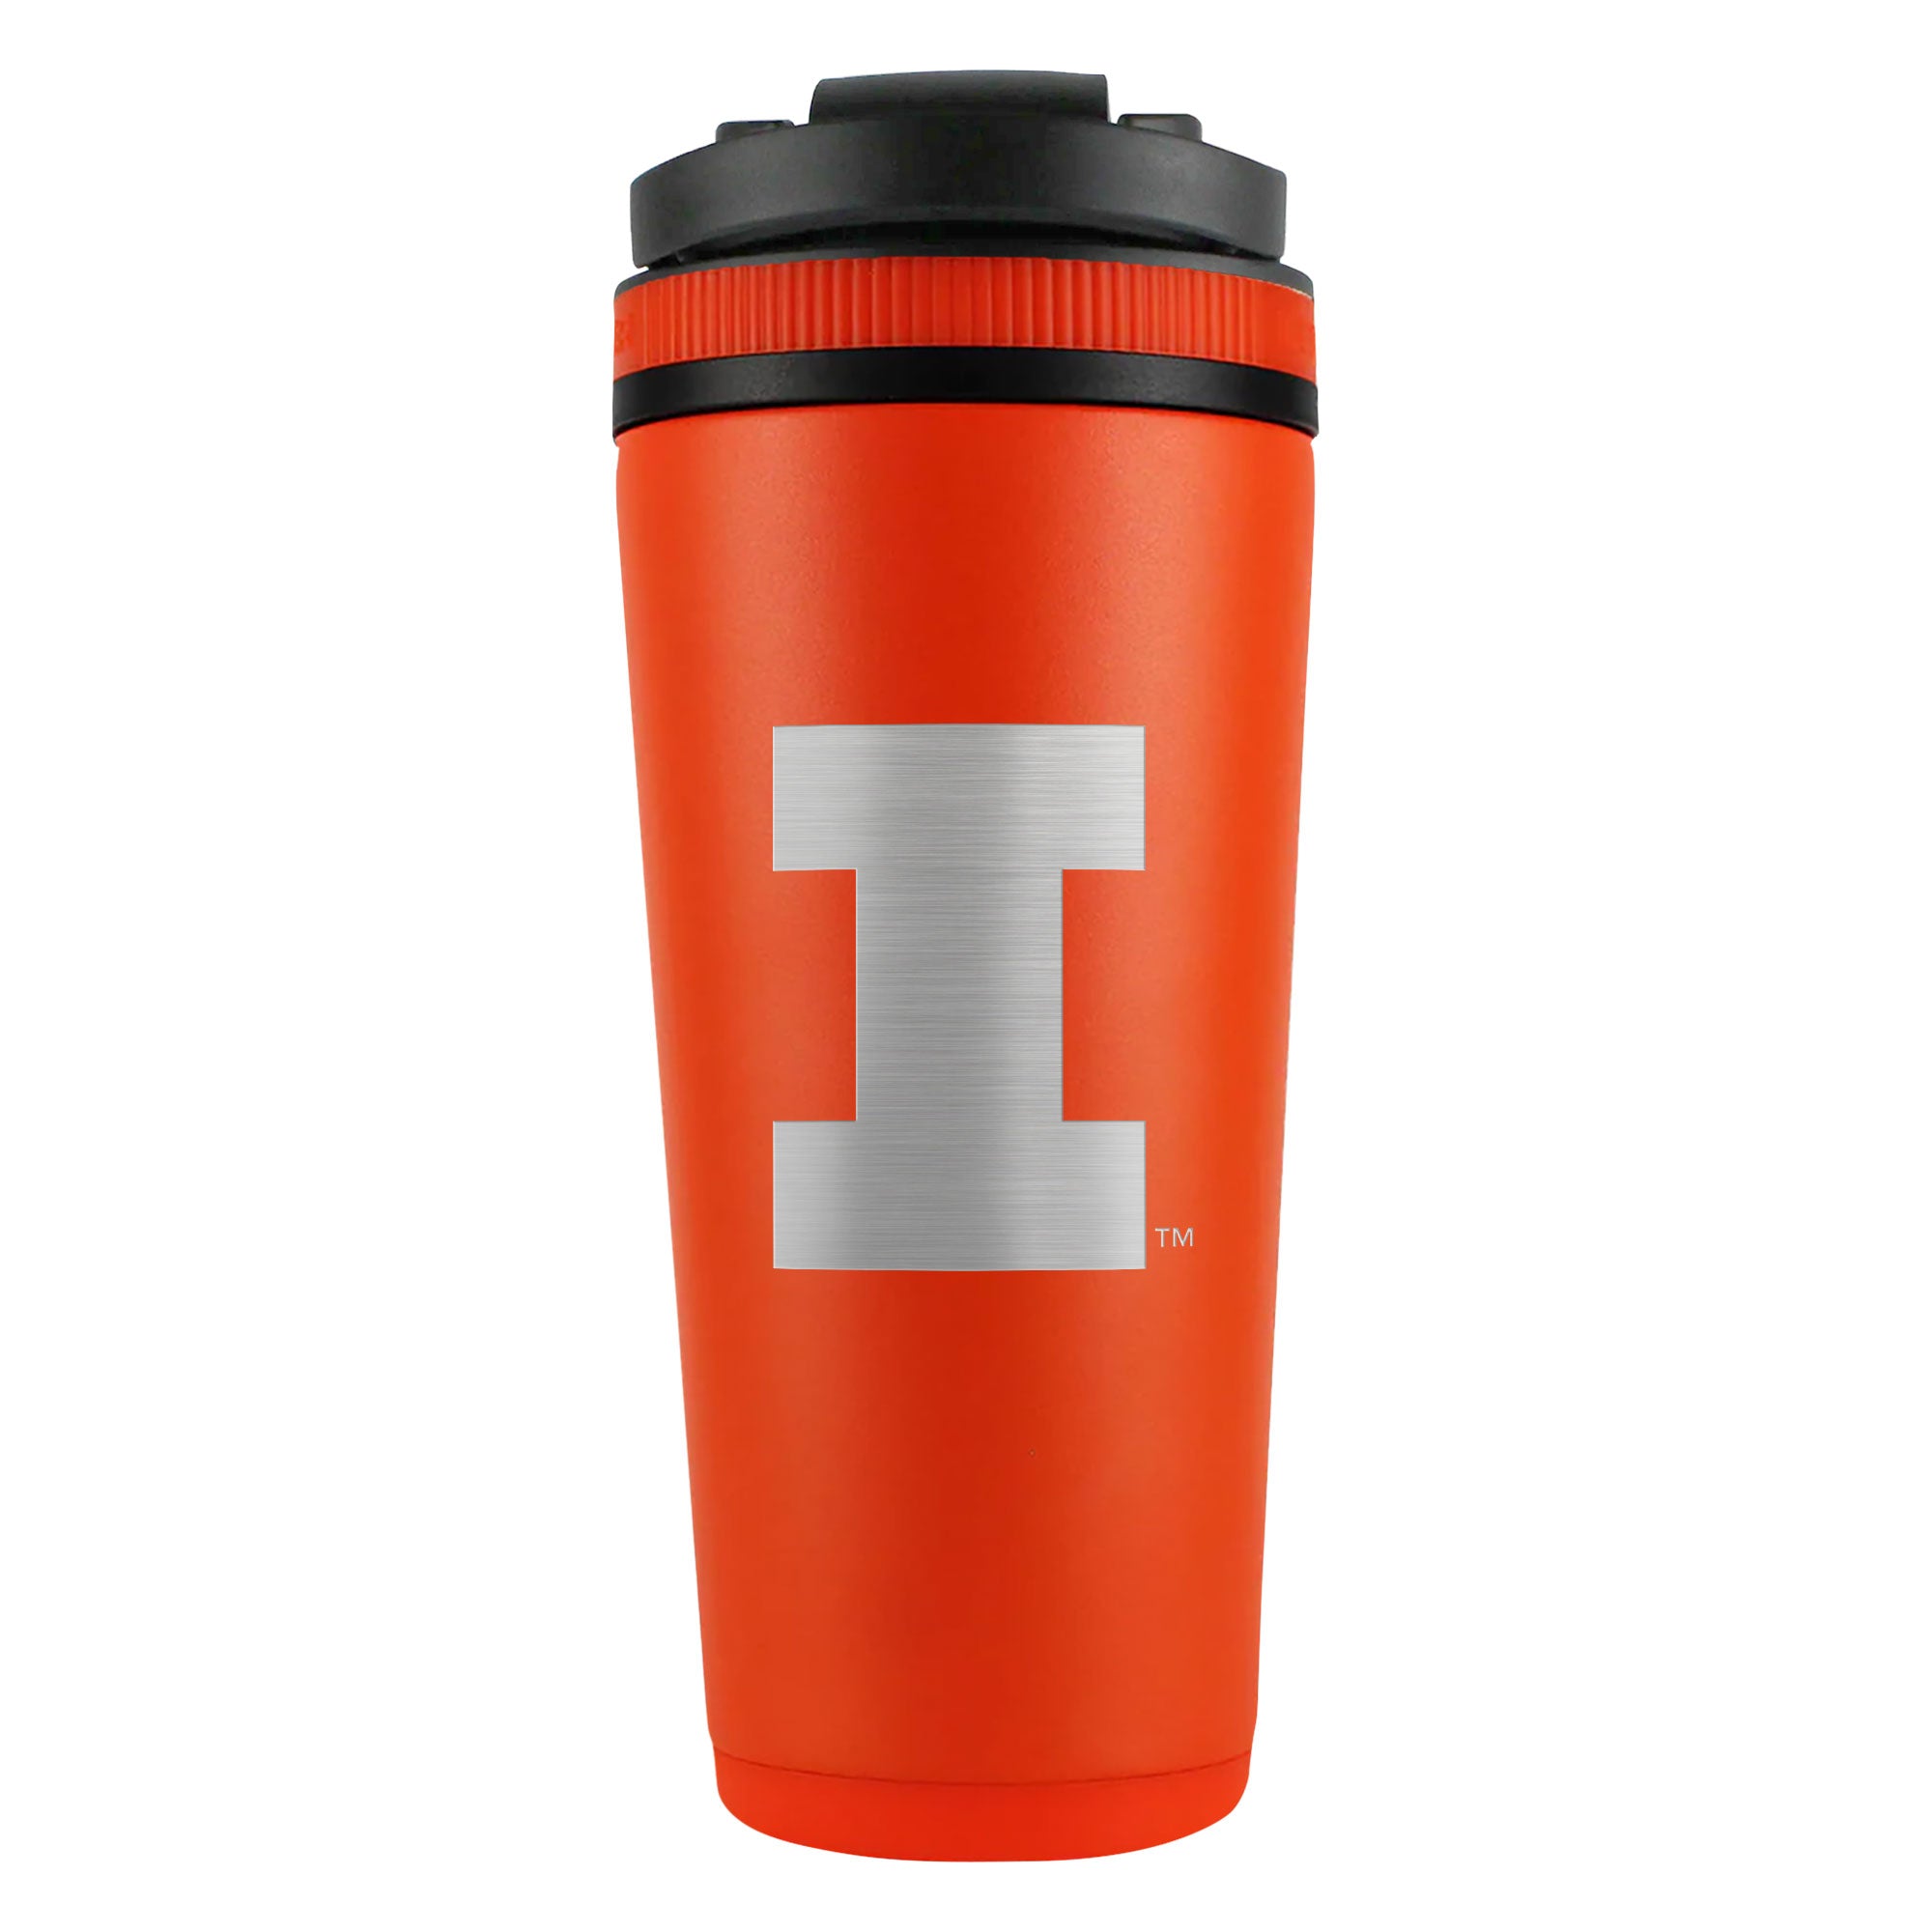 Officially Licensed University of Illinois 26oz Ice Shaker